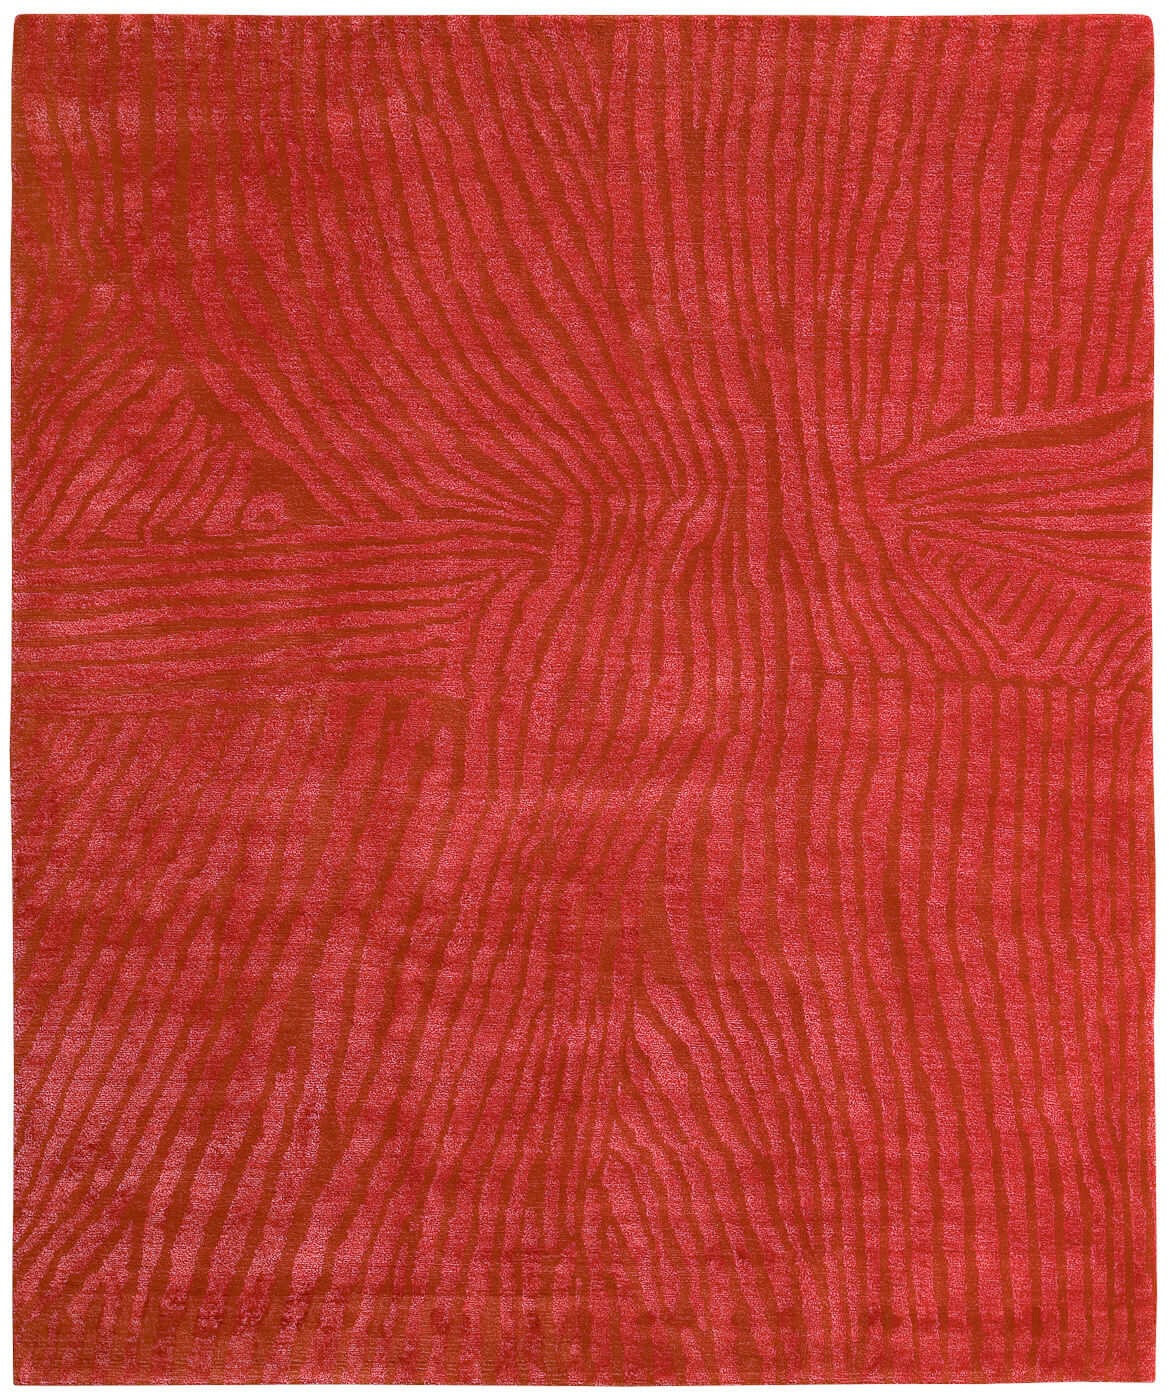 Hand-woven Red Luxury Rug ☞ Size: 250 x 300 cm